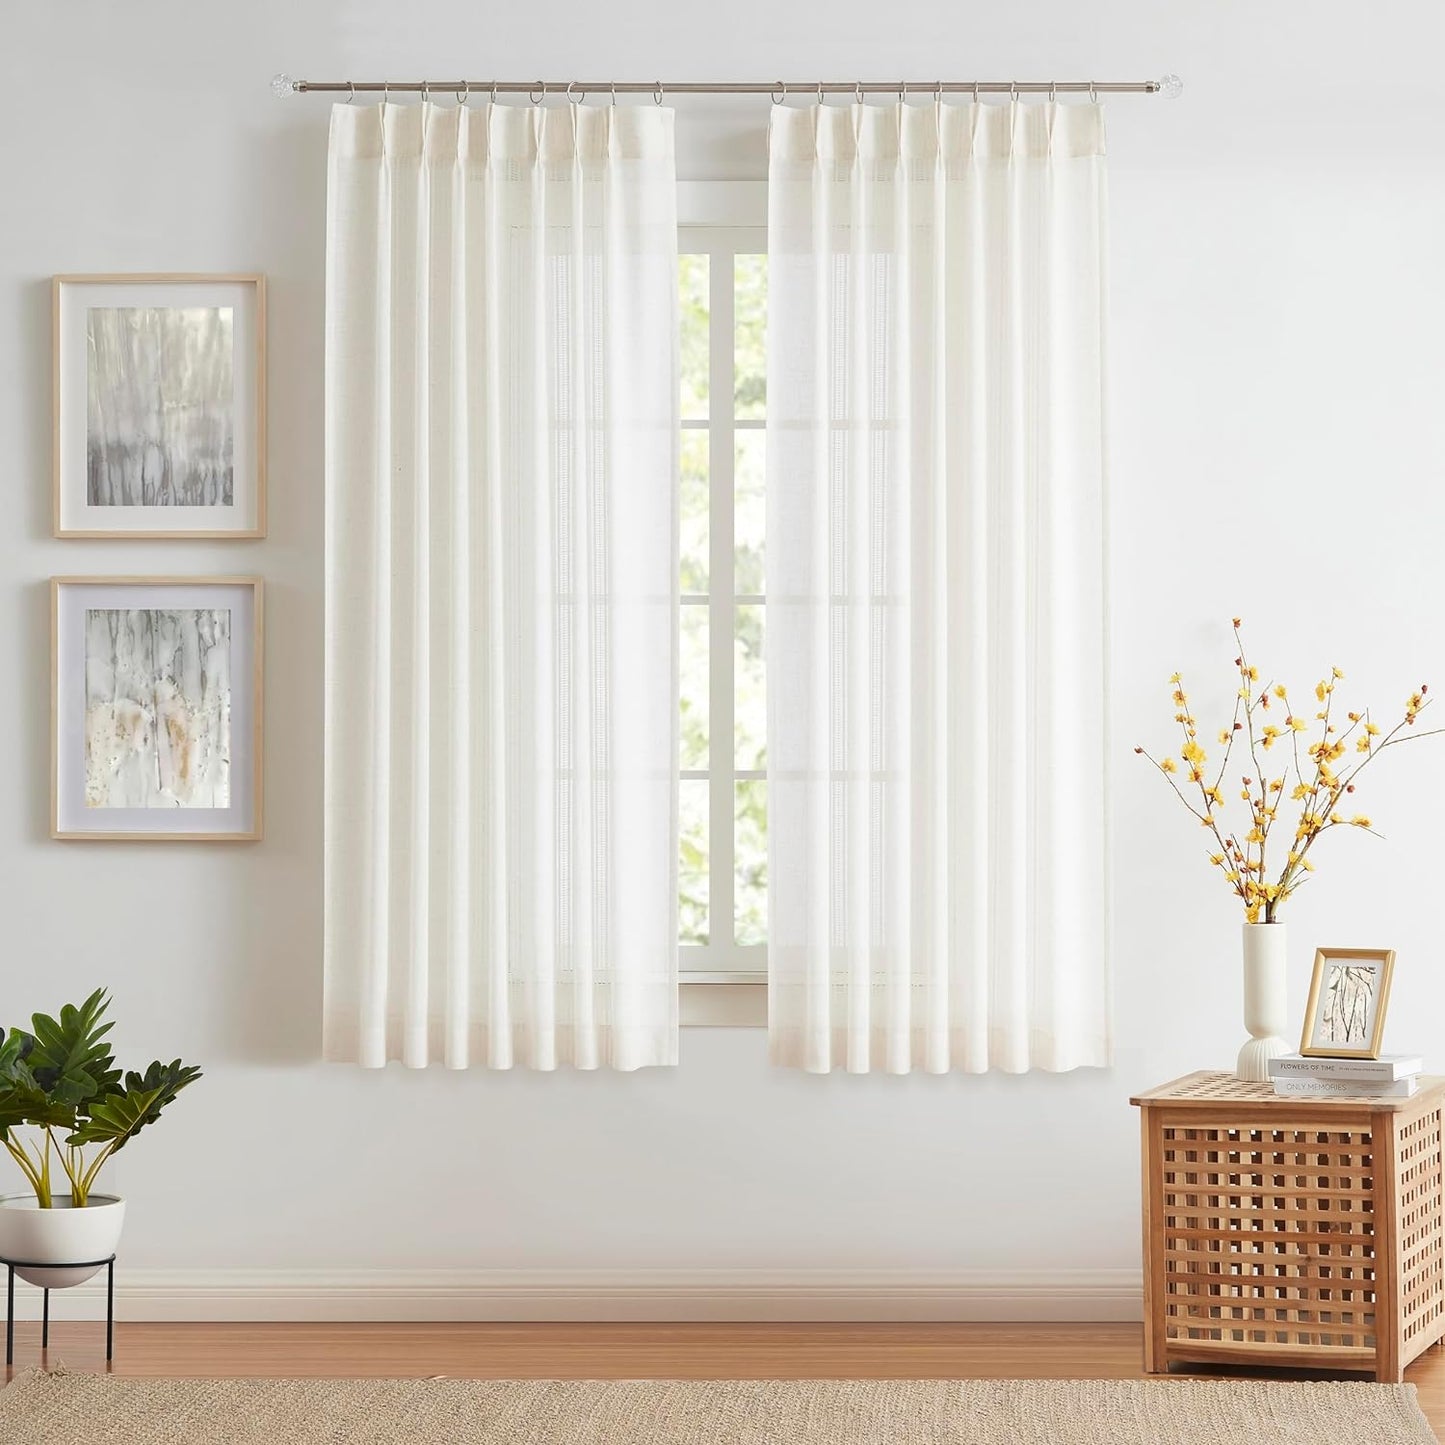 Kayne Studio Boho 2 Pages Sheer Pinch Pleated Curtains,Linen Blended 95 Inches Long Window Treatments,Light Filtering Pinch Pleat Drapes for Farmhouse Living Room 36" W X 90" L,18 Hooks,Beige  Kayne Studio Natural 36"X63"X2 